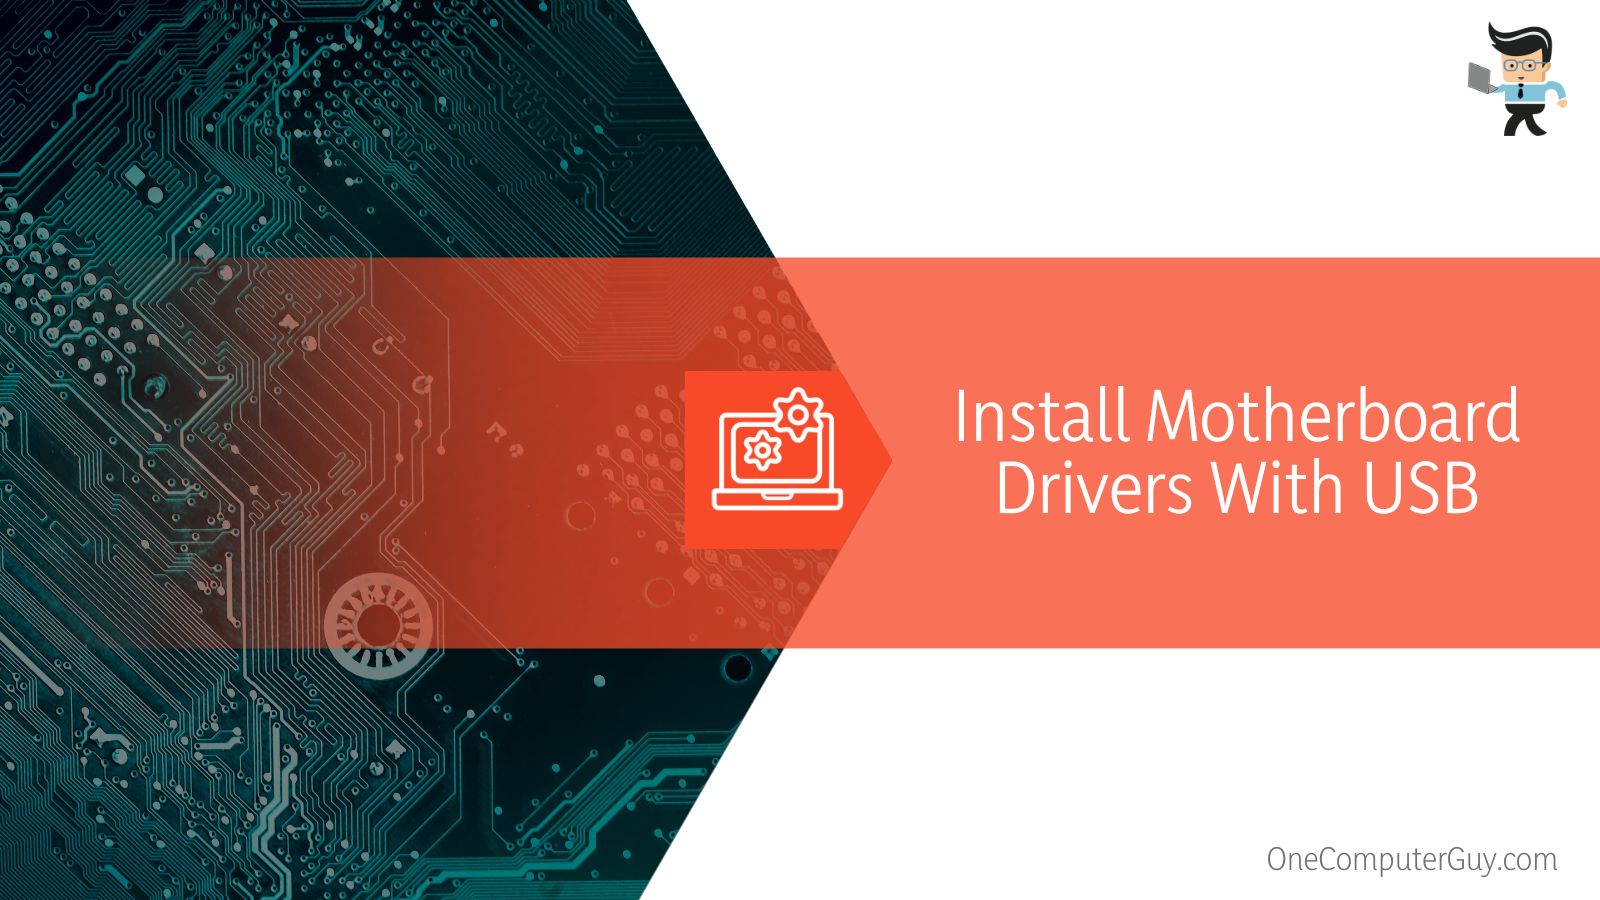 Install Motherboard Drivers With USB